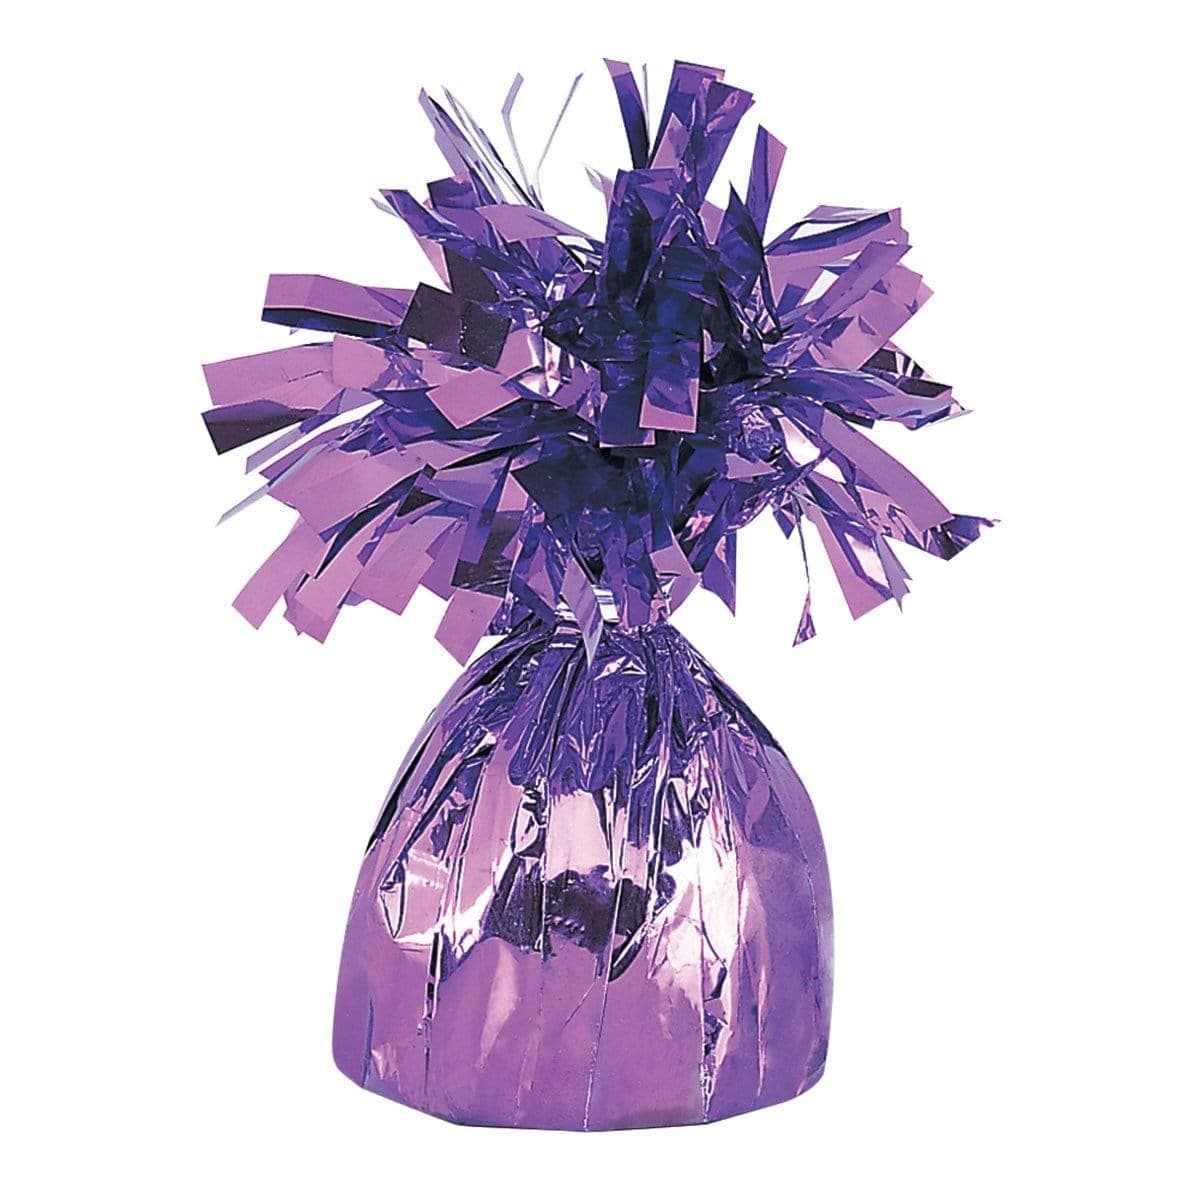 Buy Balloons Lavender Foil Balloon Weight sold at Party Expert